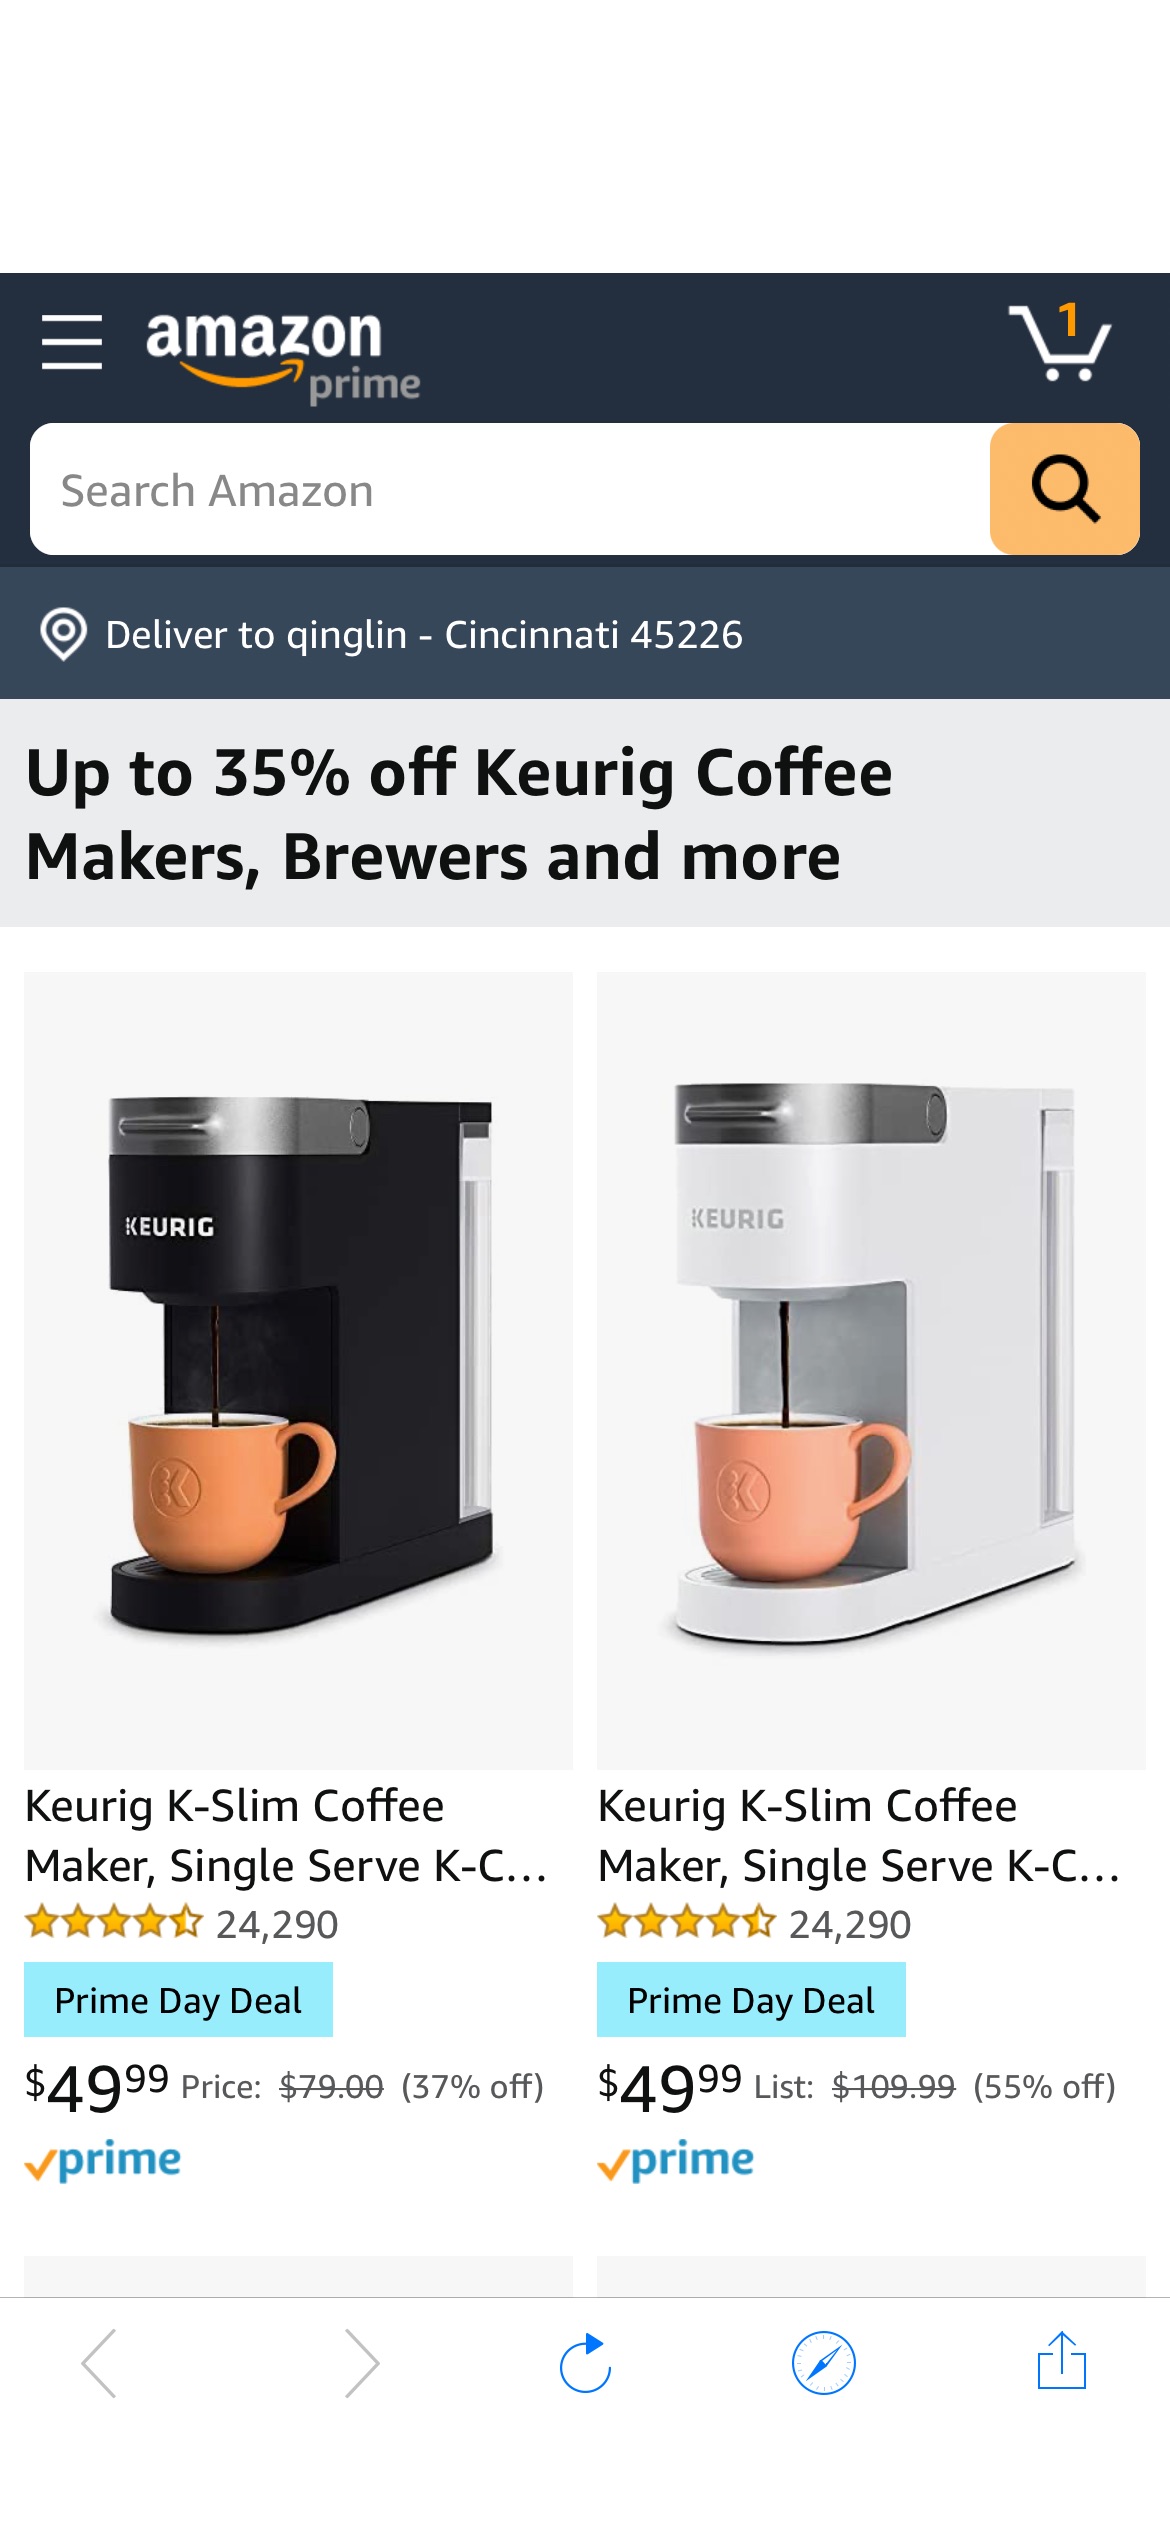 Up to 35% off Keurig Coffee Makers, Brewers and more咖啡机